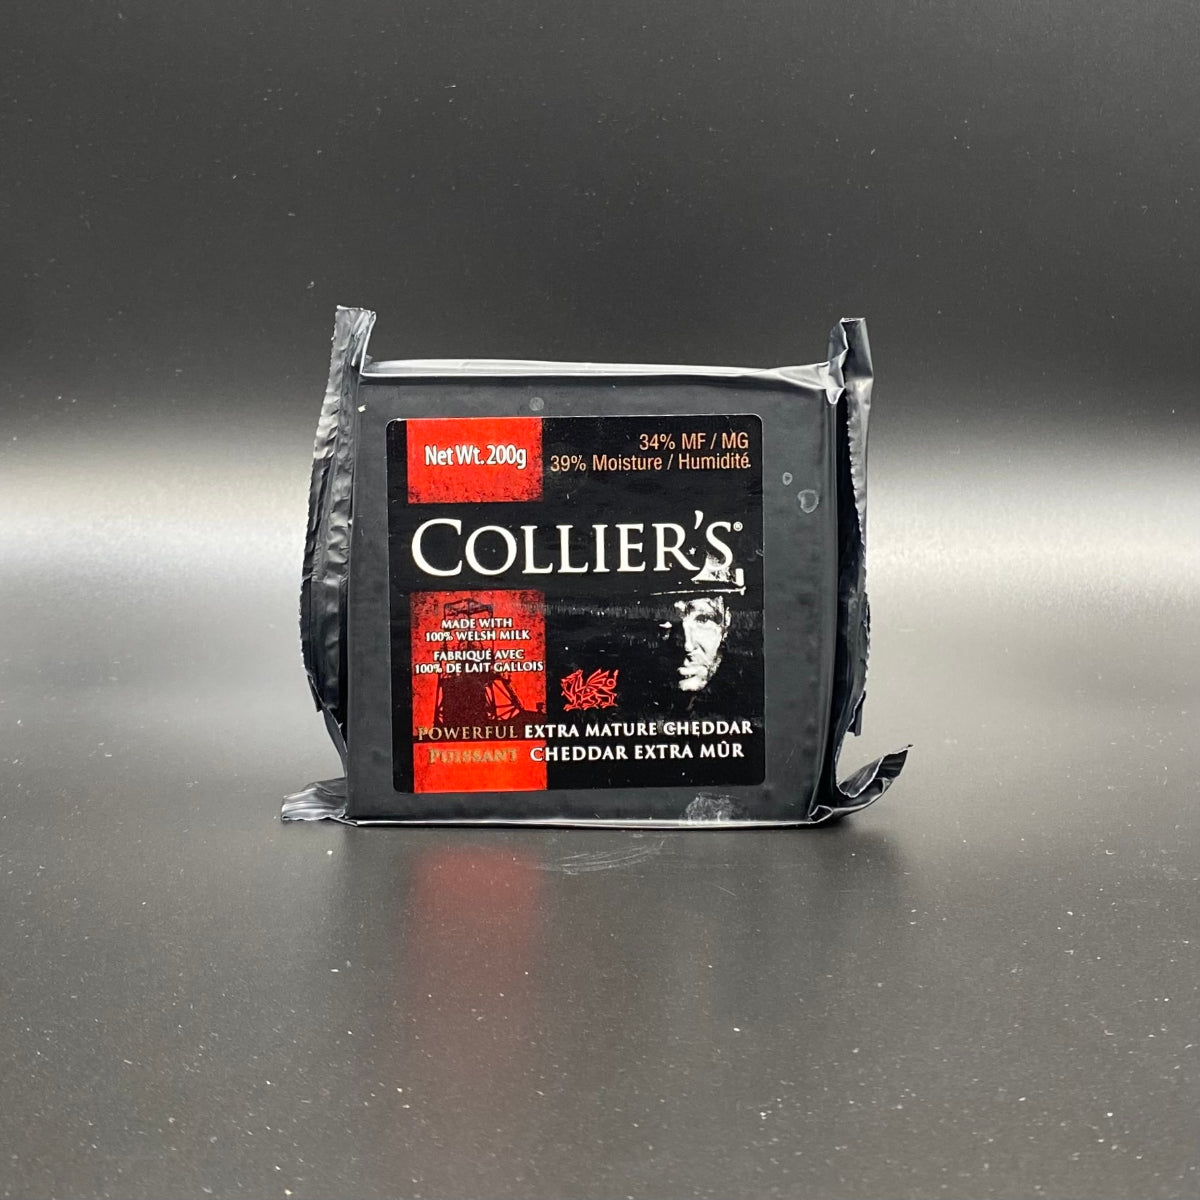 Collier's Aged Welsh Cheddar